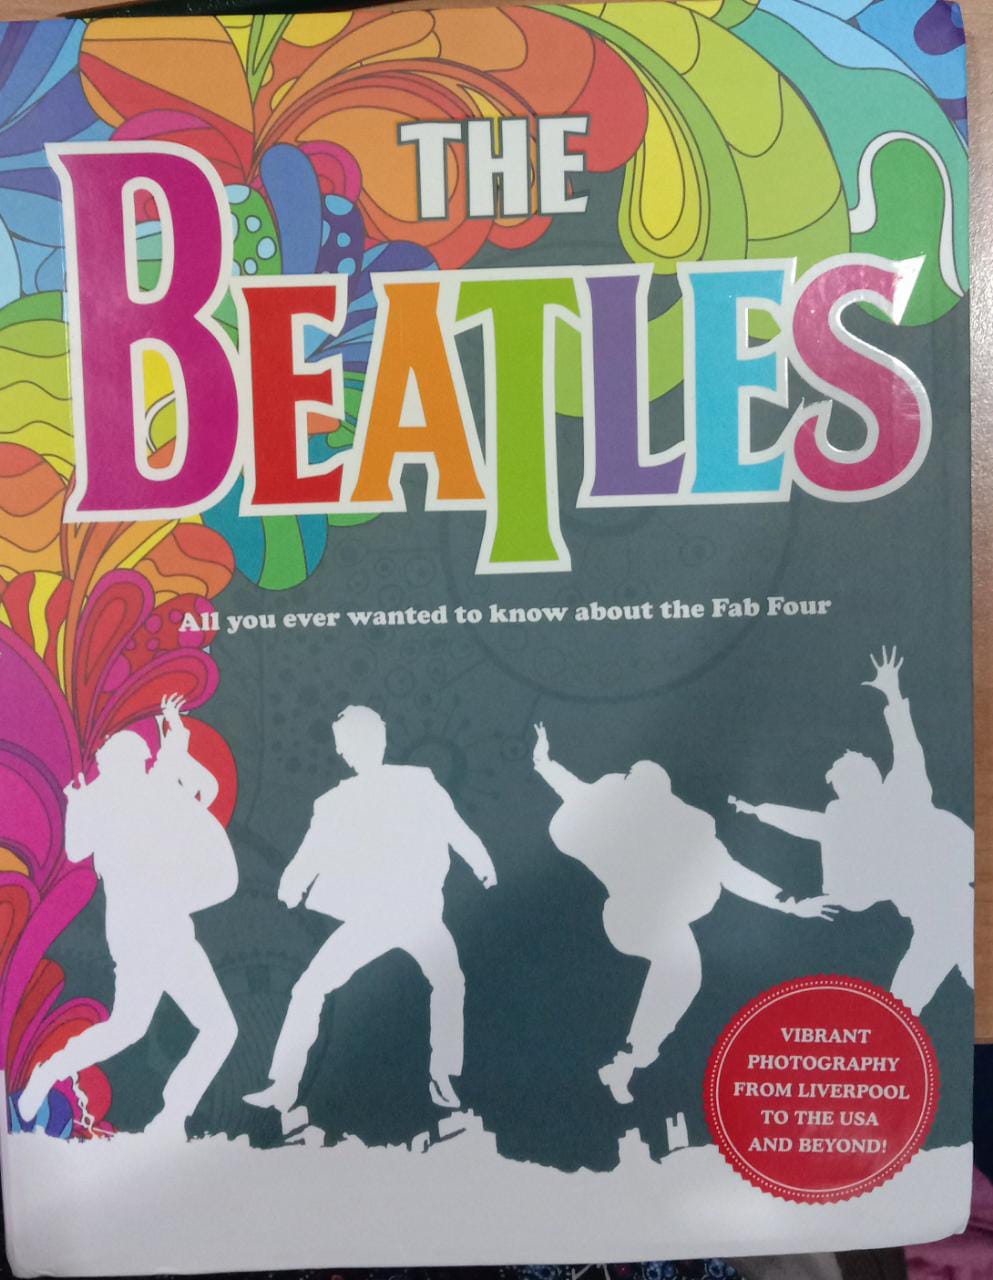 The Beattles 
All you ever wanted to know about the fab four